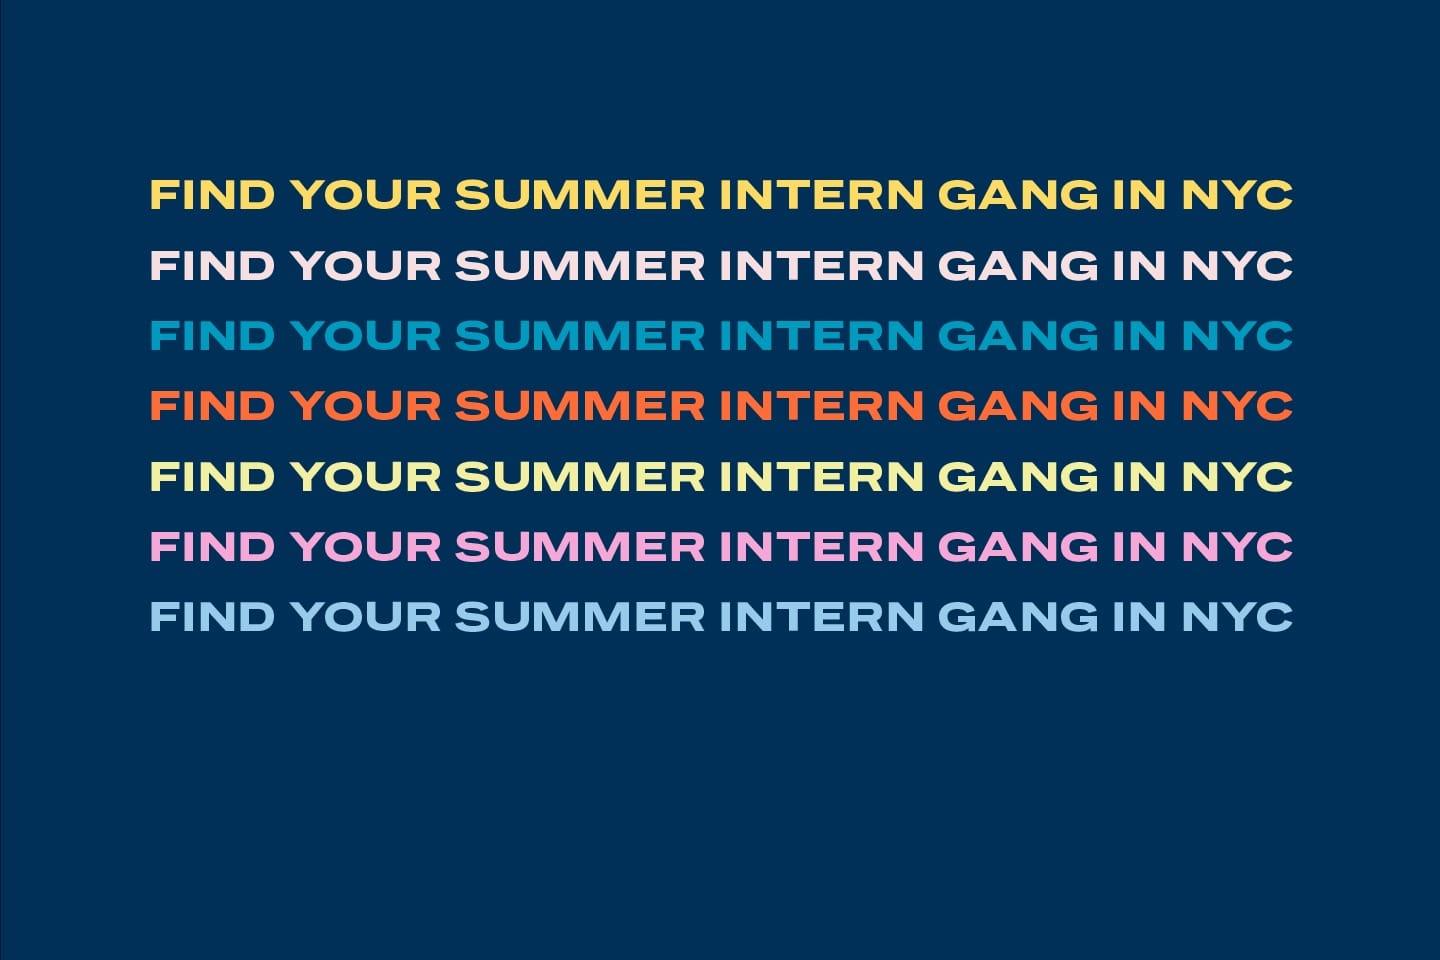 Find Your Summer Intern Gang in NYC with Bumble!